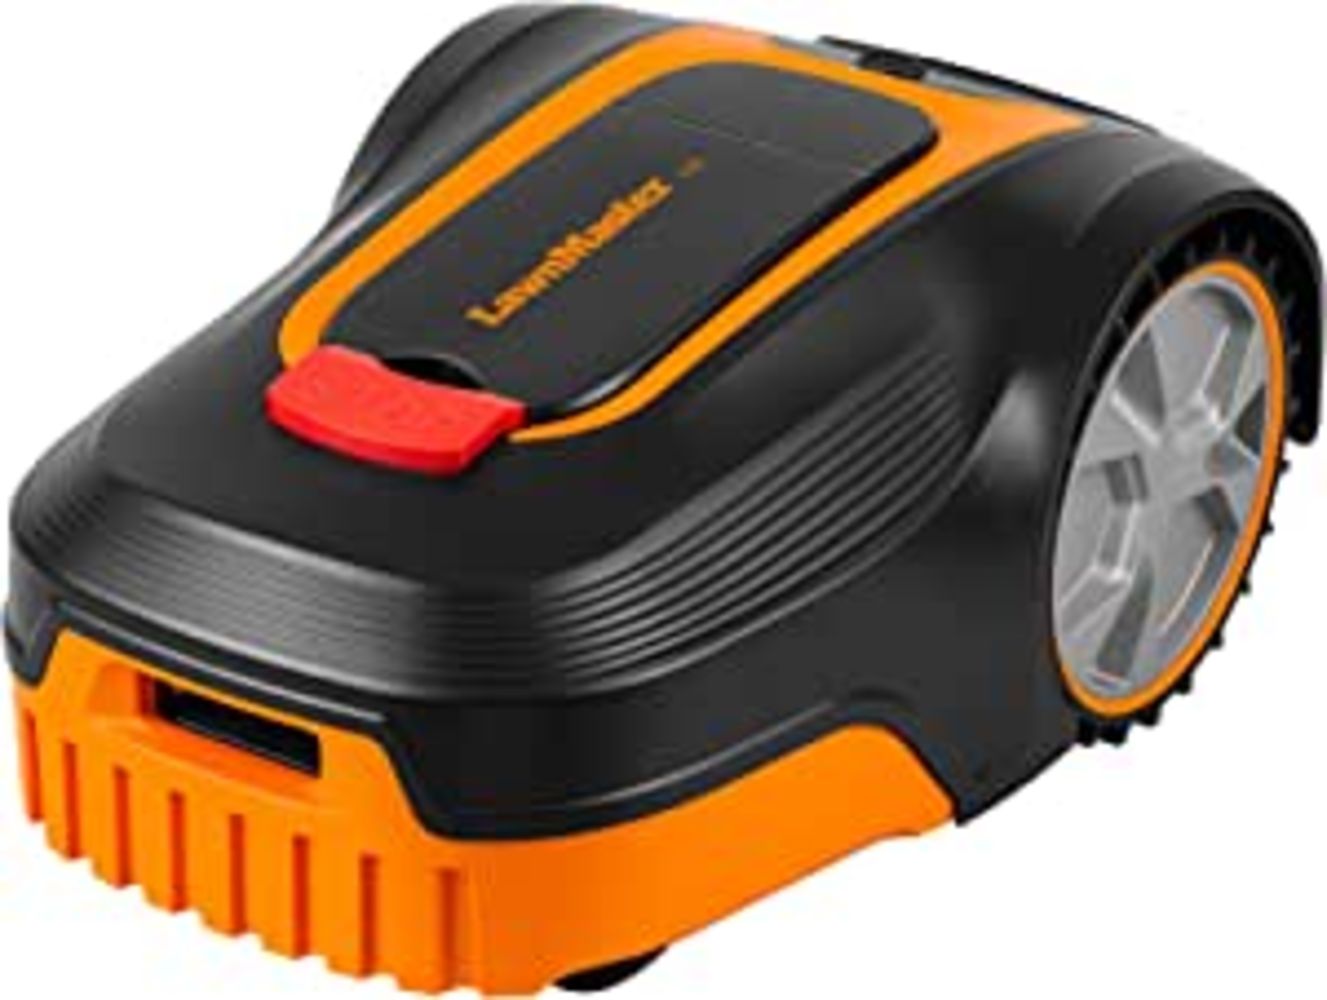 Last of the Lawnmaster Robot Lawnmowers, Cordless Lawnmowers, Industral & Domestic Vaccum Cleaners